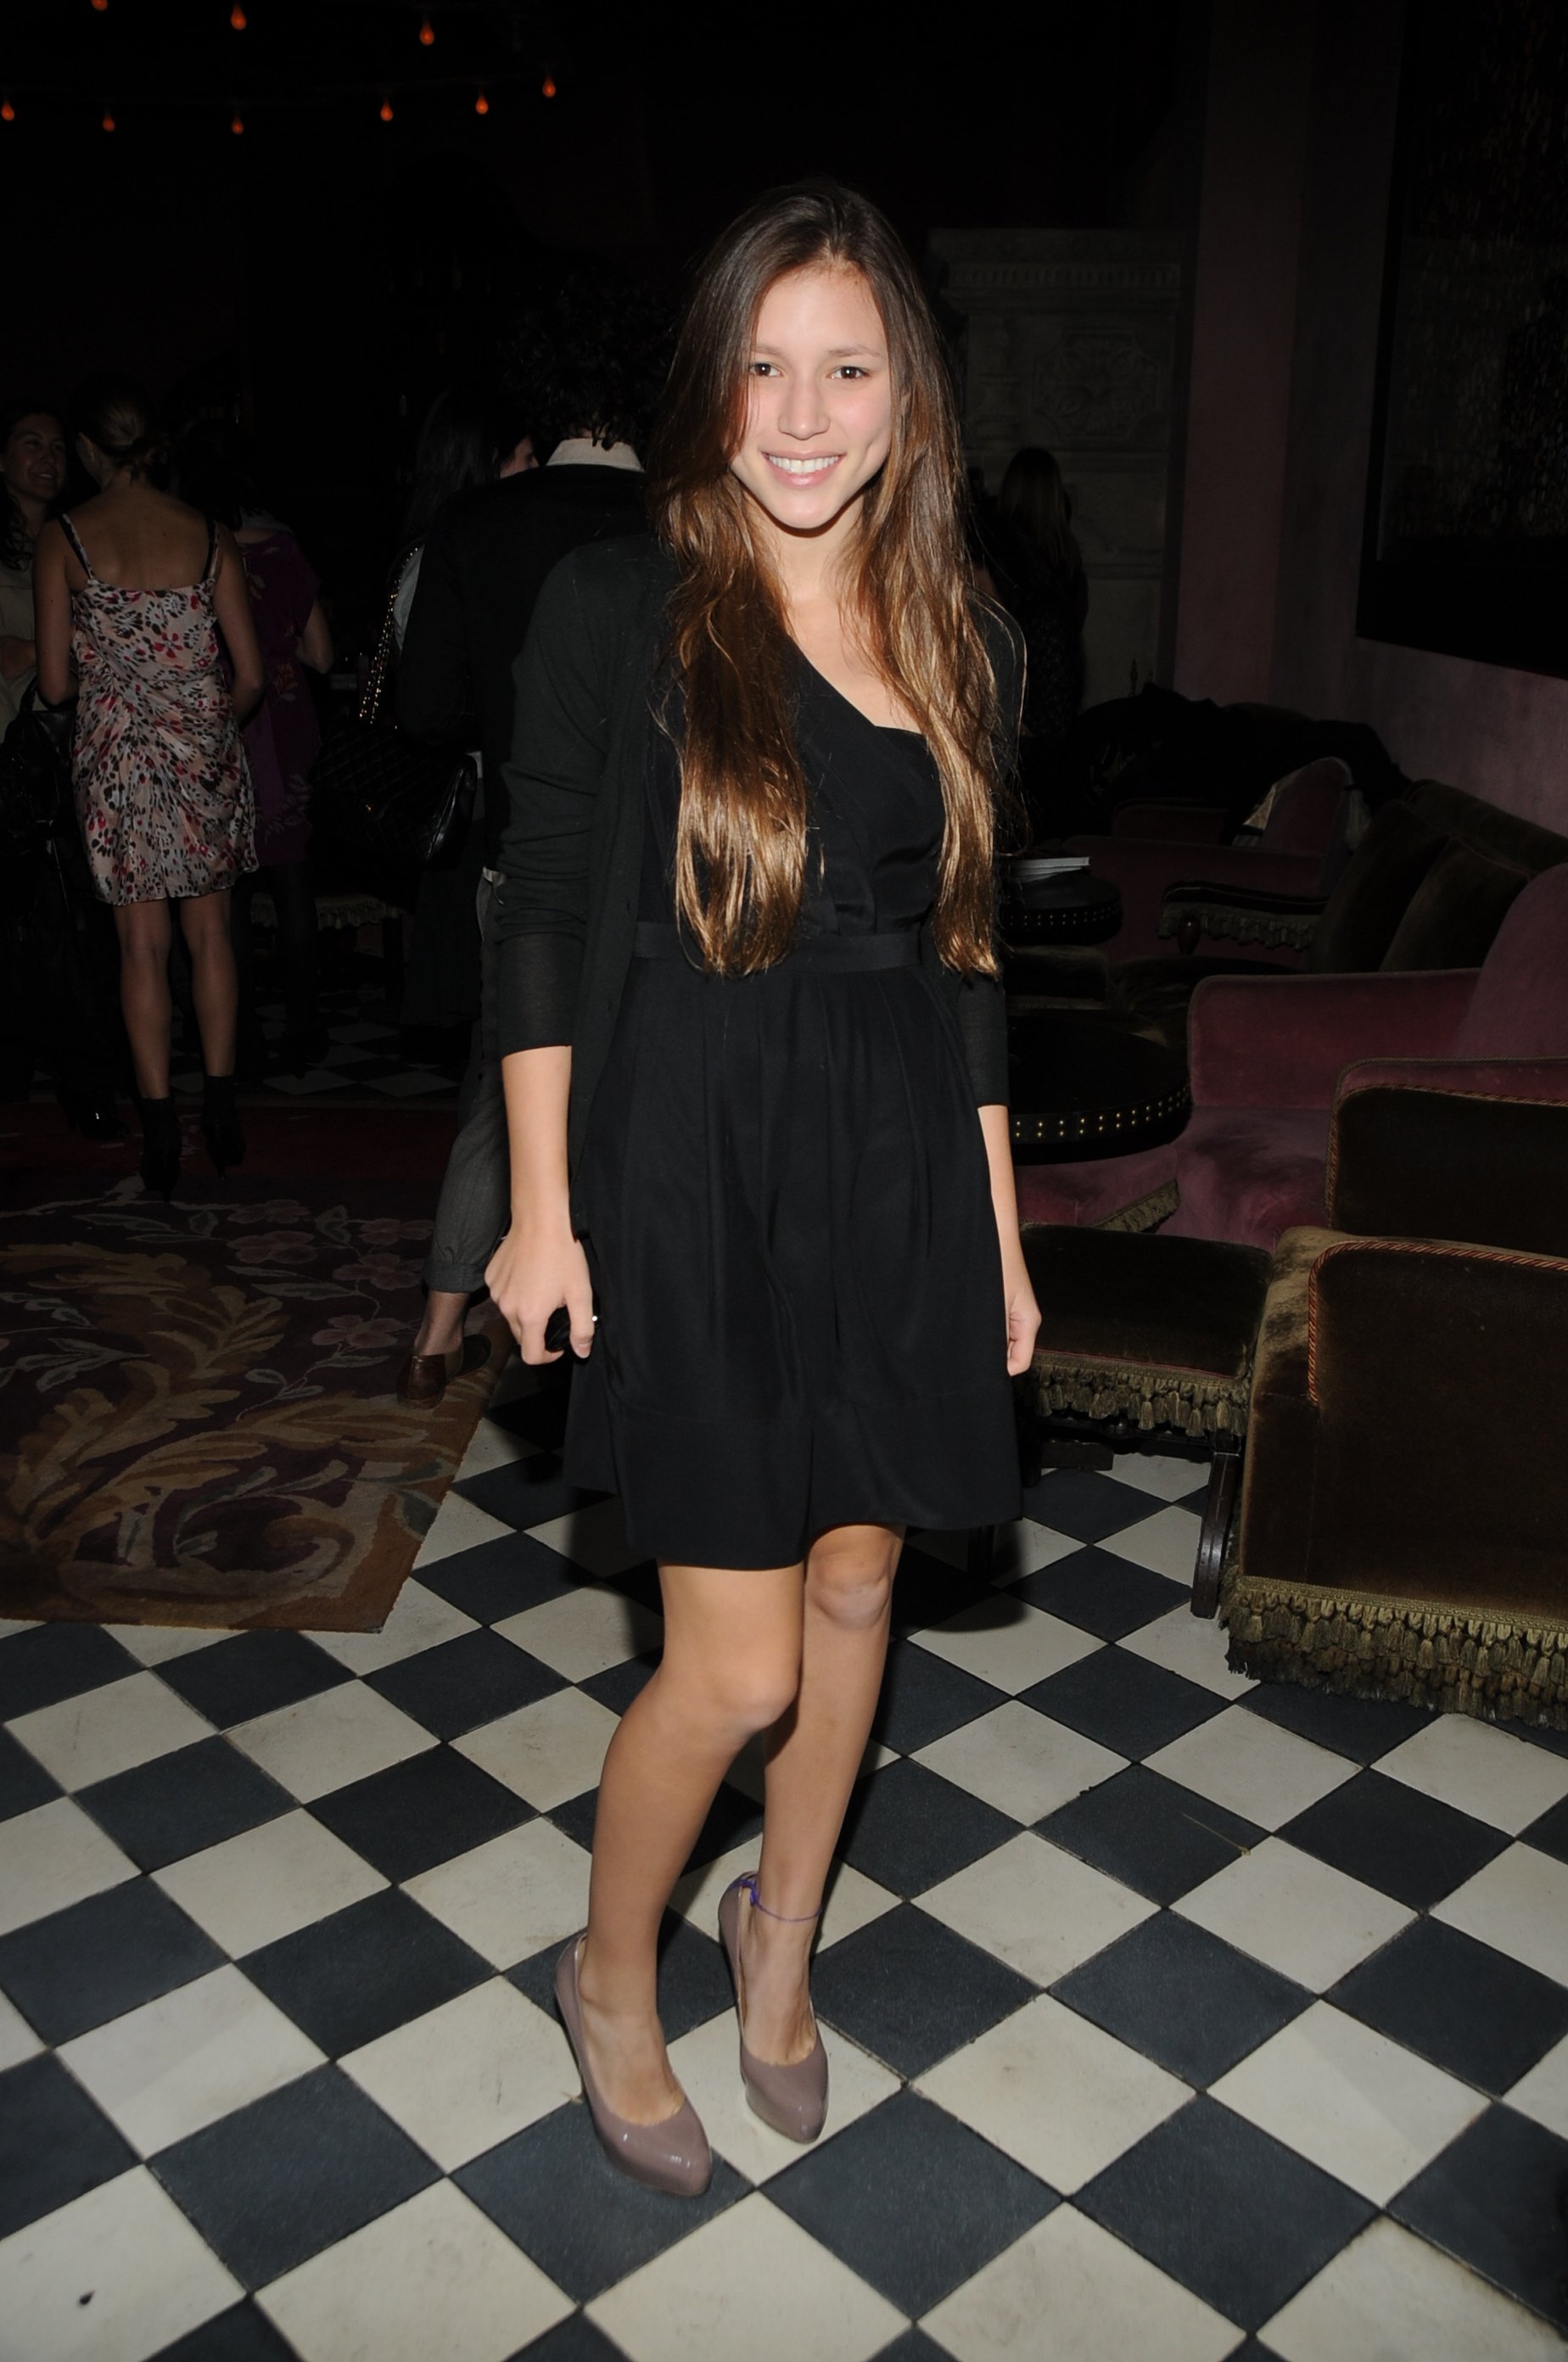 Josephine Becker attends the party for the launch of 'The Teen Vogue Handbook' on October 13, 2009 | Source: Getty Images